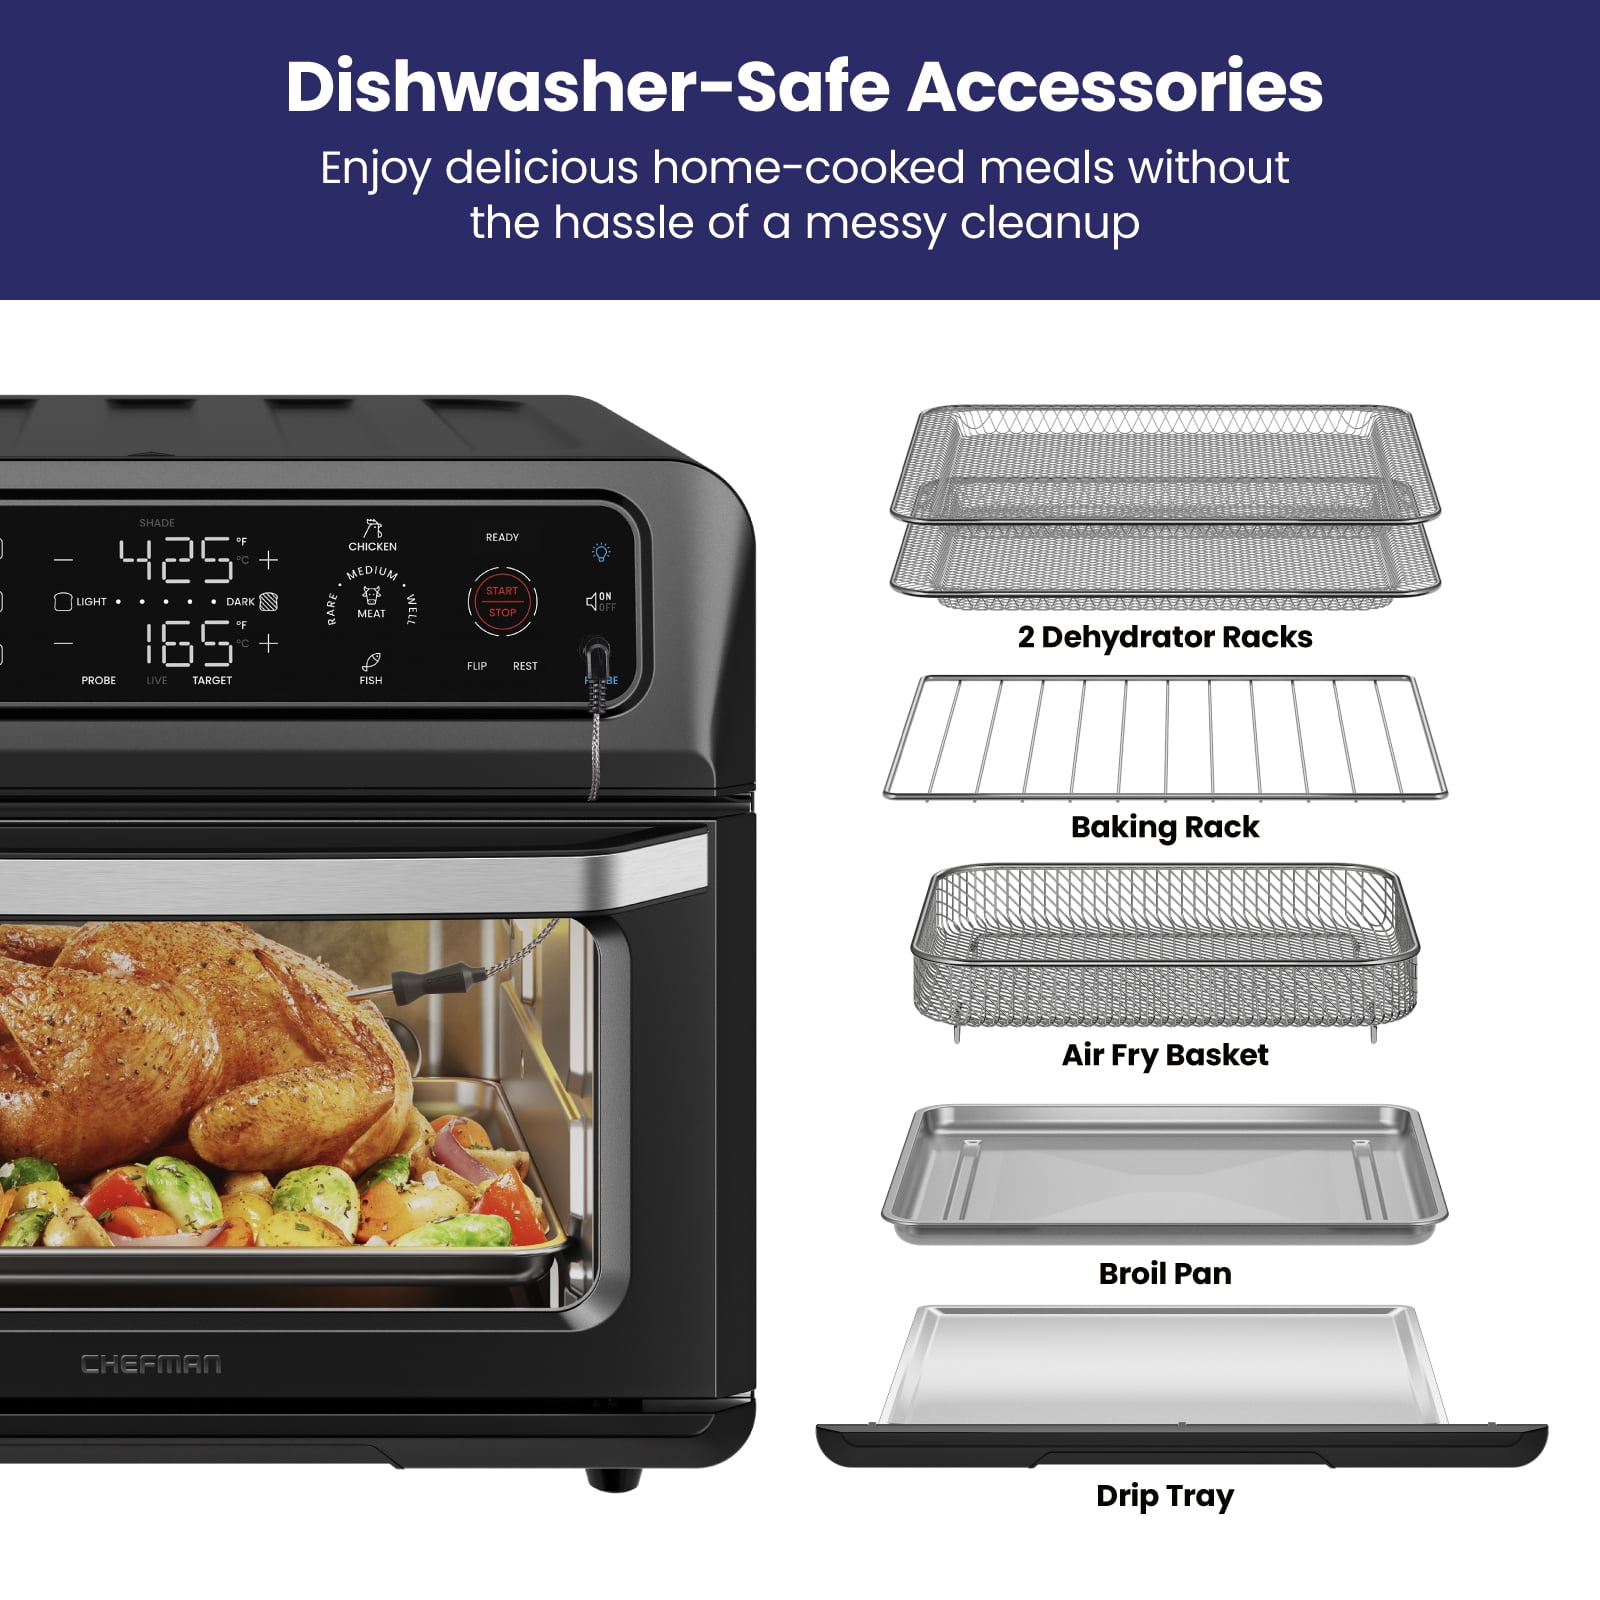 Chefman Stainless Steel Dual-Function Air Fryer and Toaster Oven, 20 L -  Harris Teeter